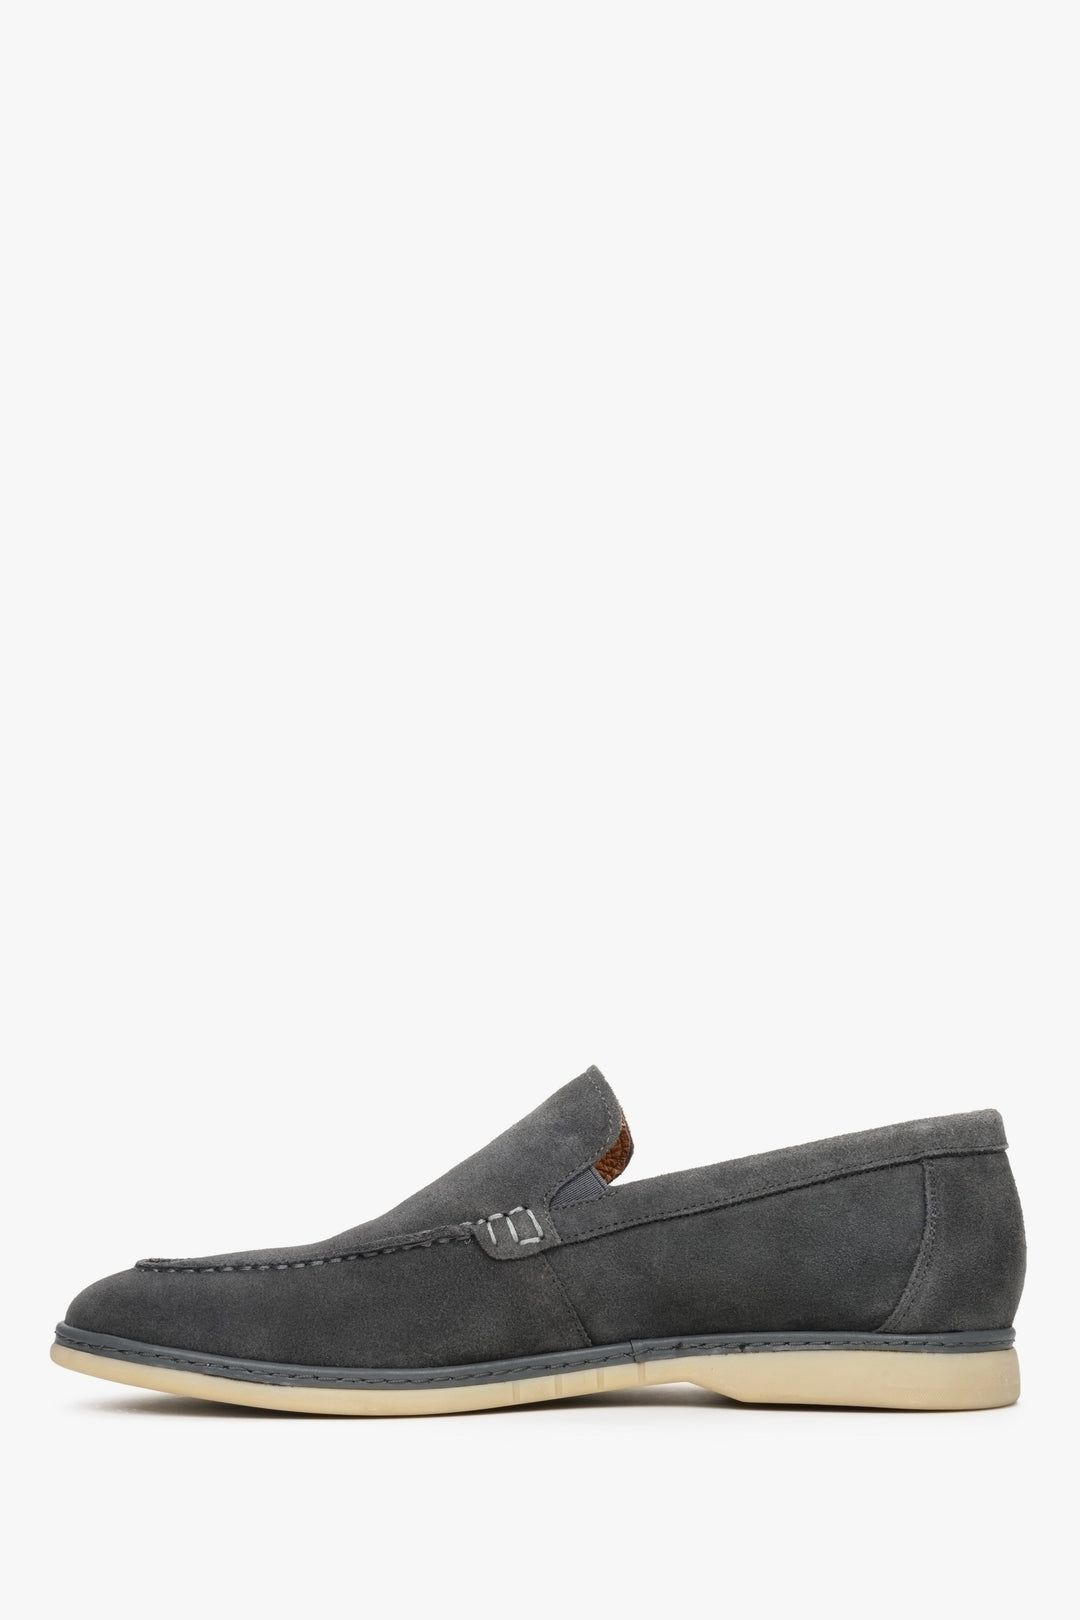 Men's grey velour loafers for fall - shoe profile.